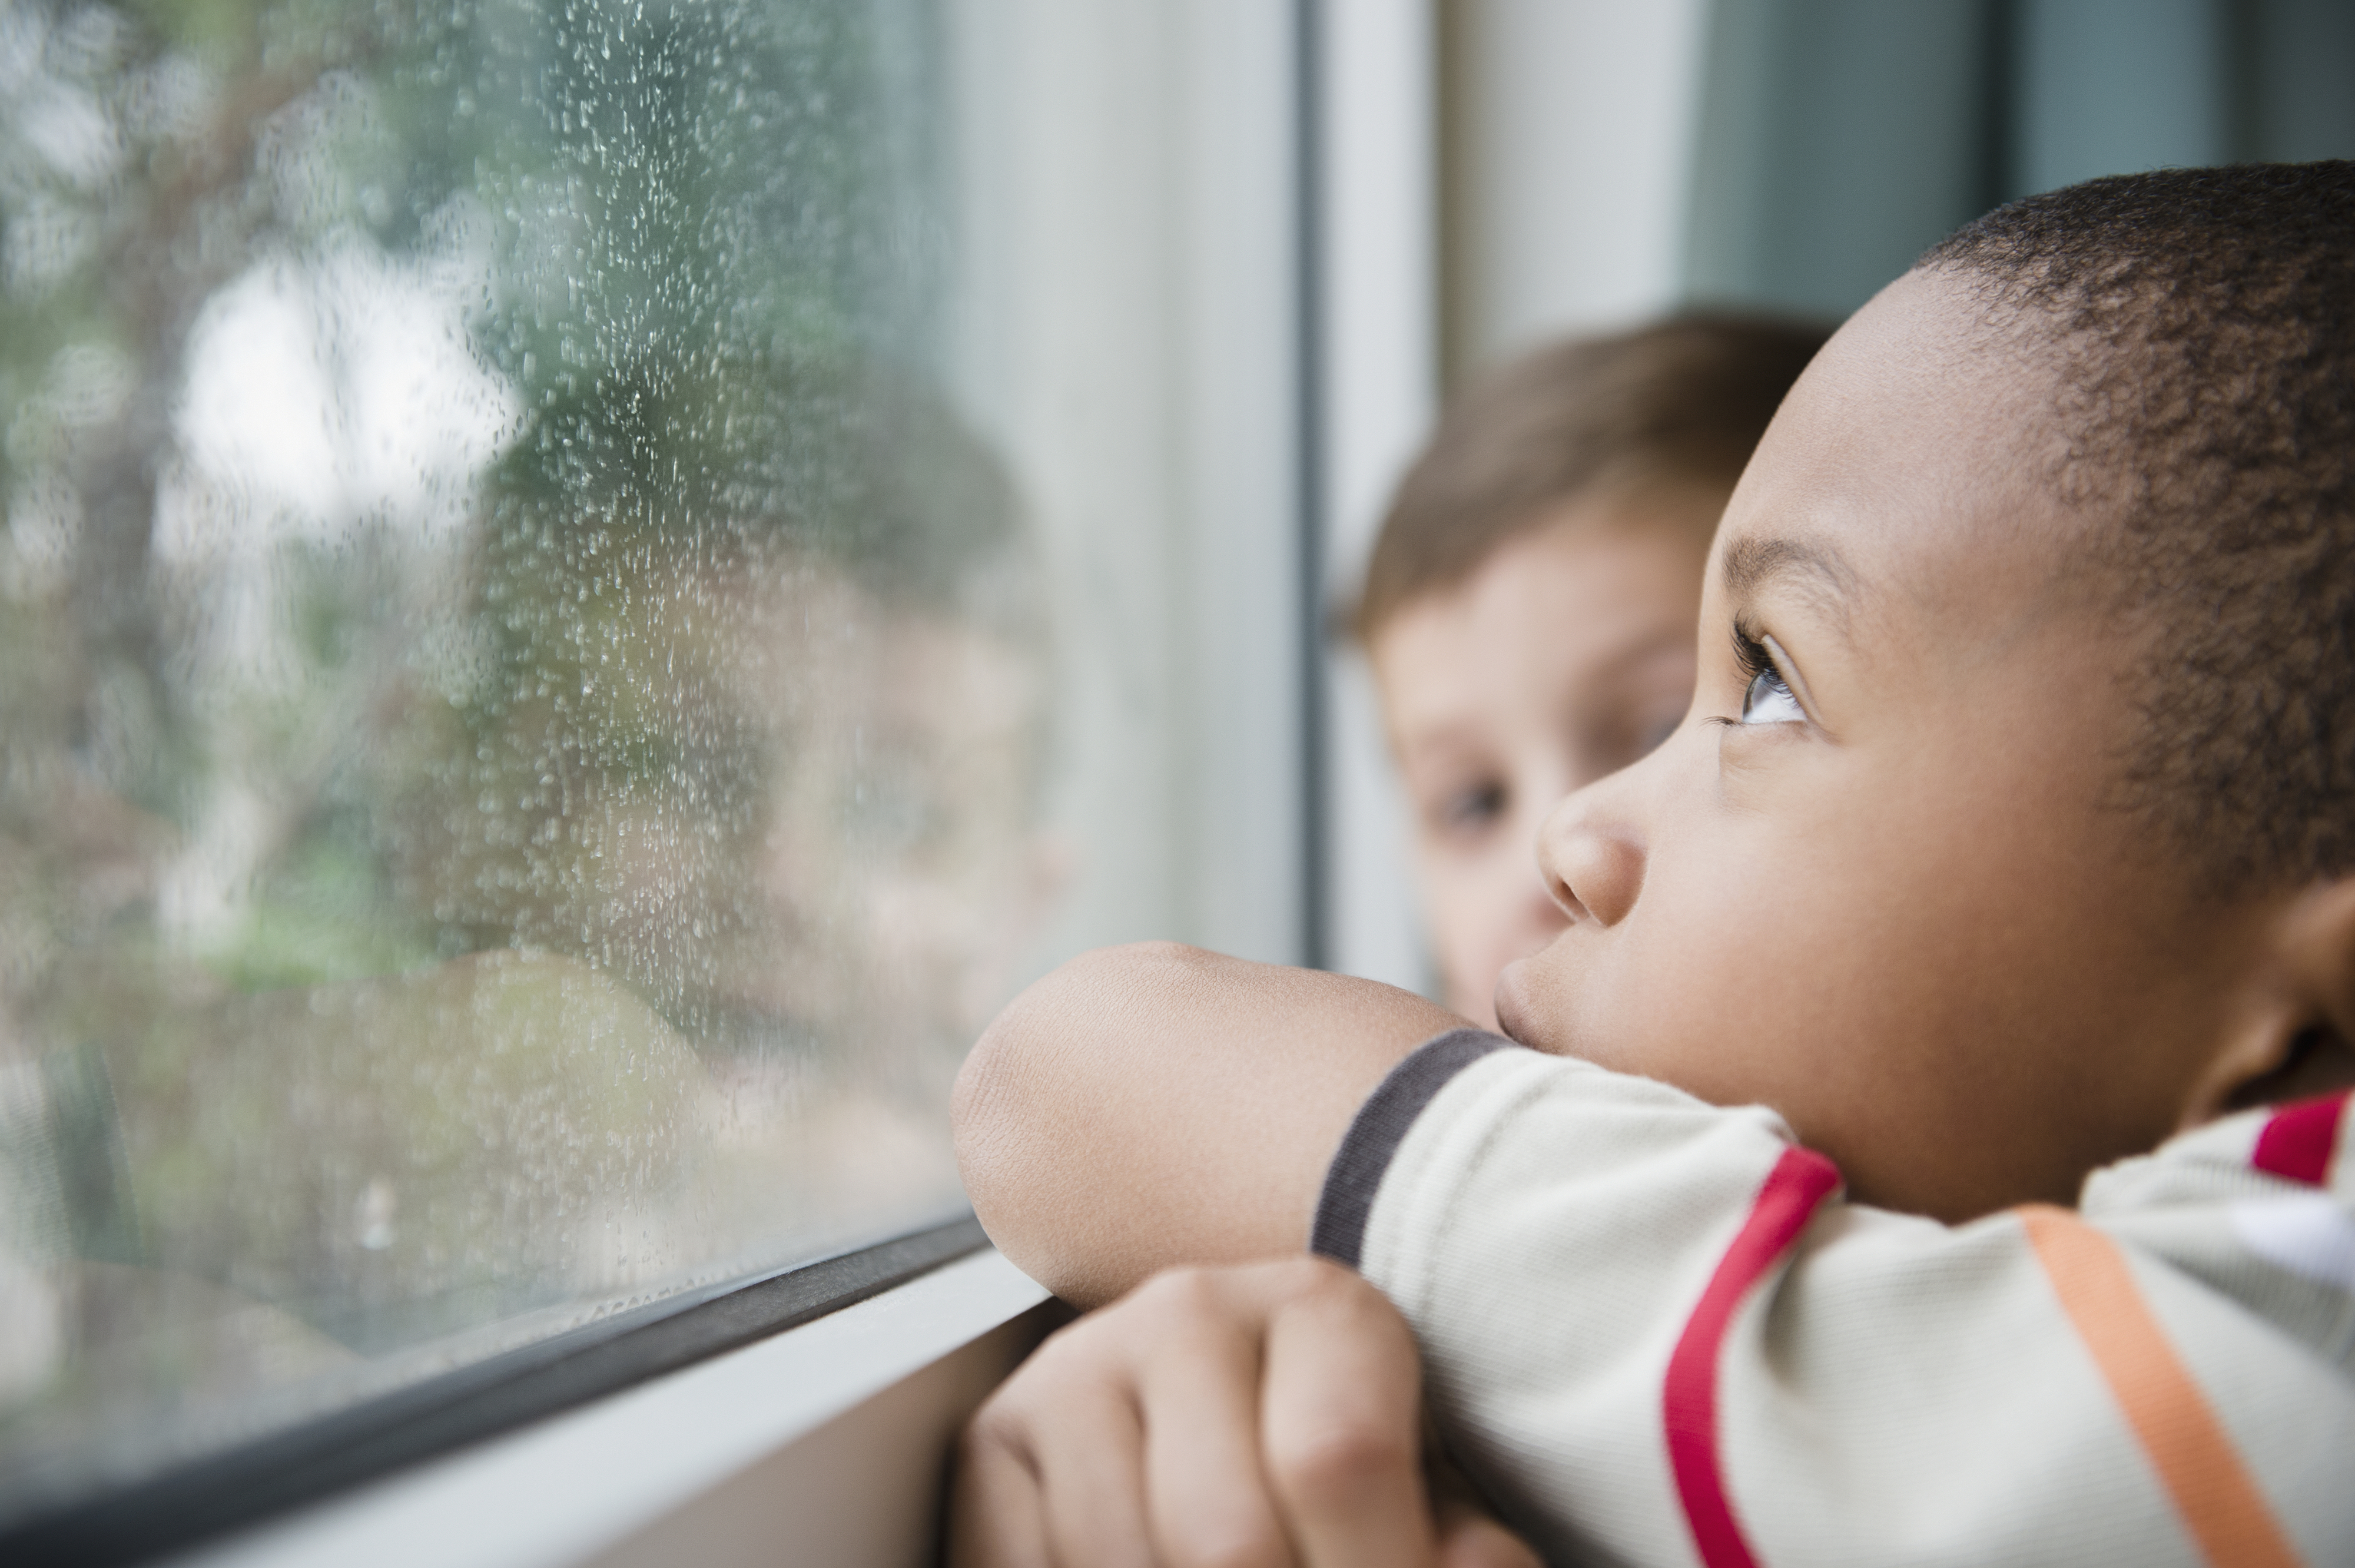 Two kids looking out the window on a rainy day